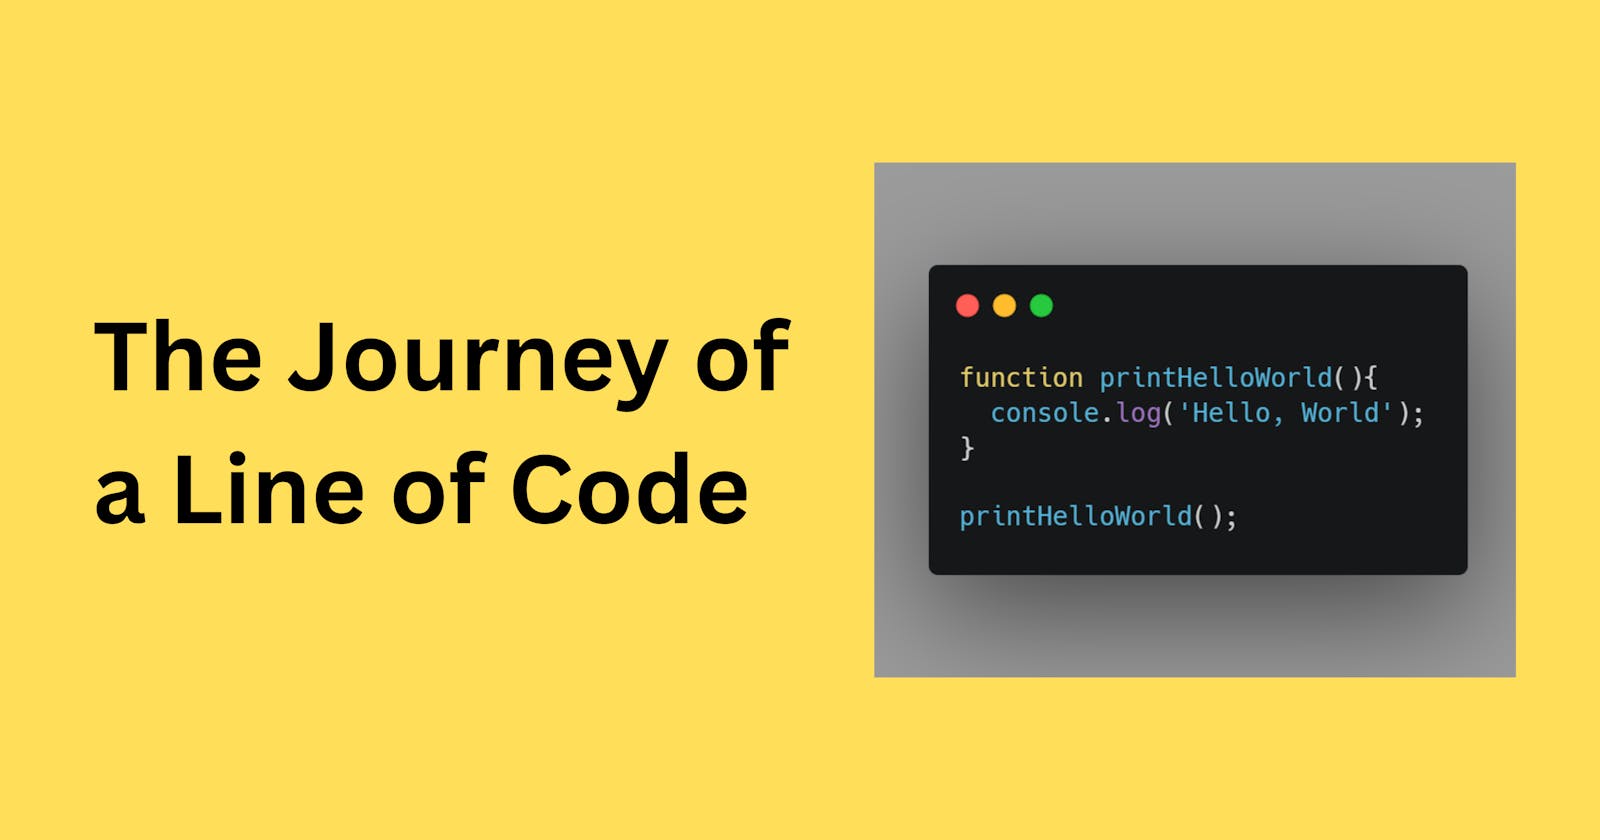 The Journey of a Line of Code